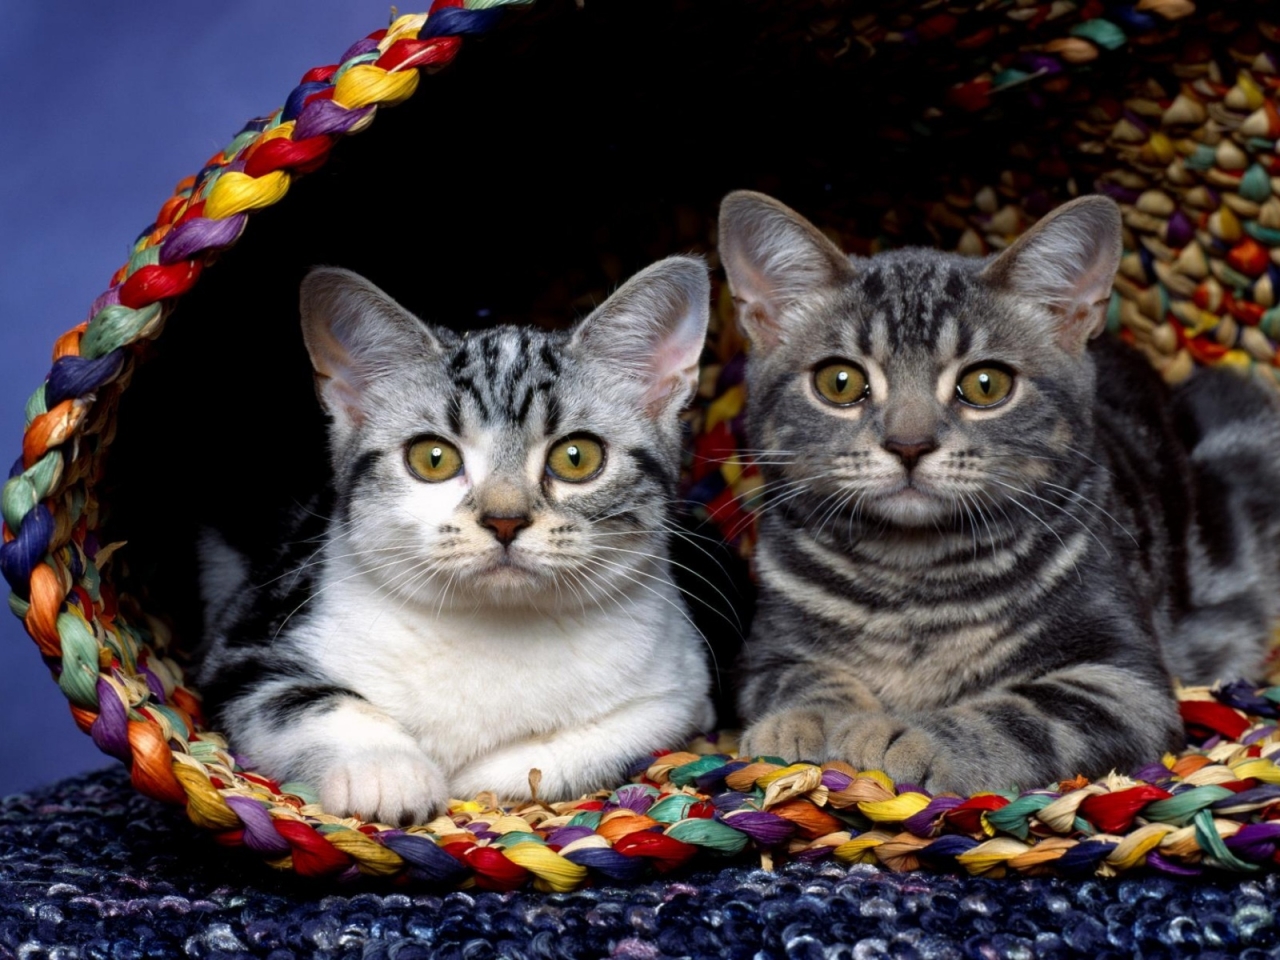 Cats in basket for 1280 x 960 resolution